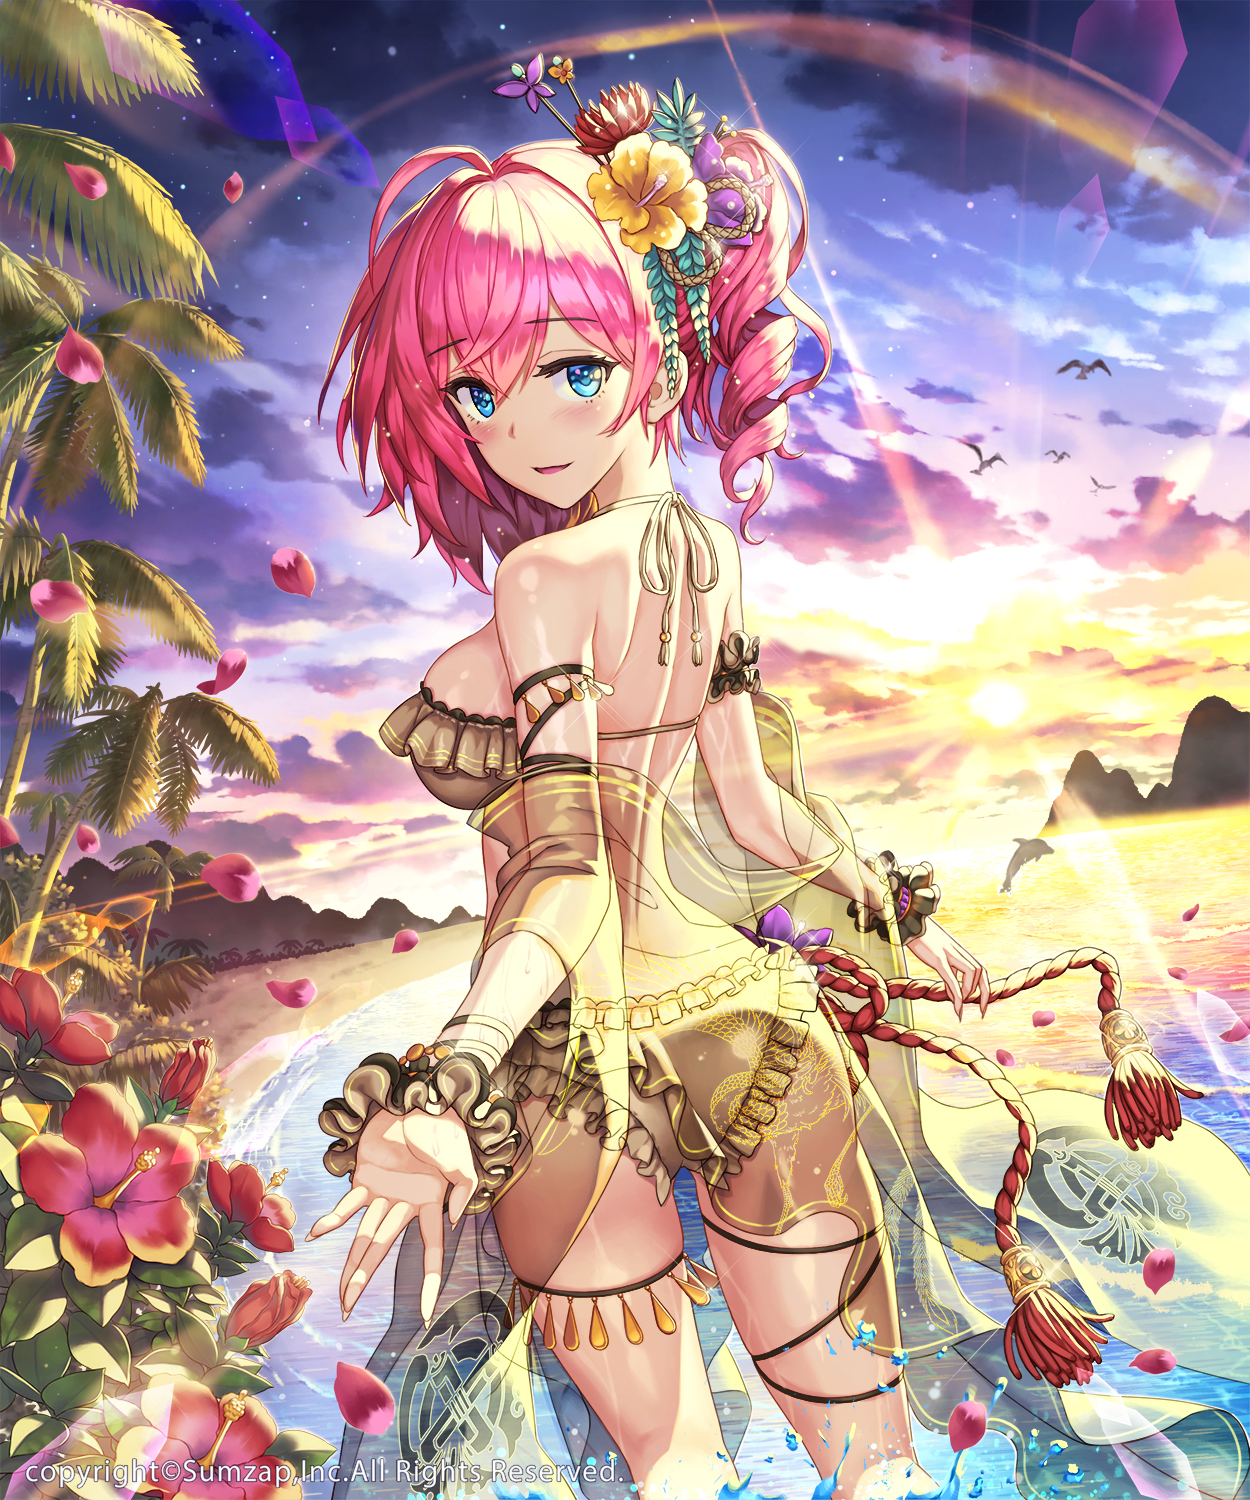 Pink Hair Blue Eyes Gold Bra Gold Characters Flowers Beach Sun Rays Mountains Birds Hair Accessories 1250x1500